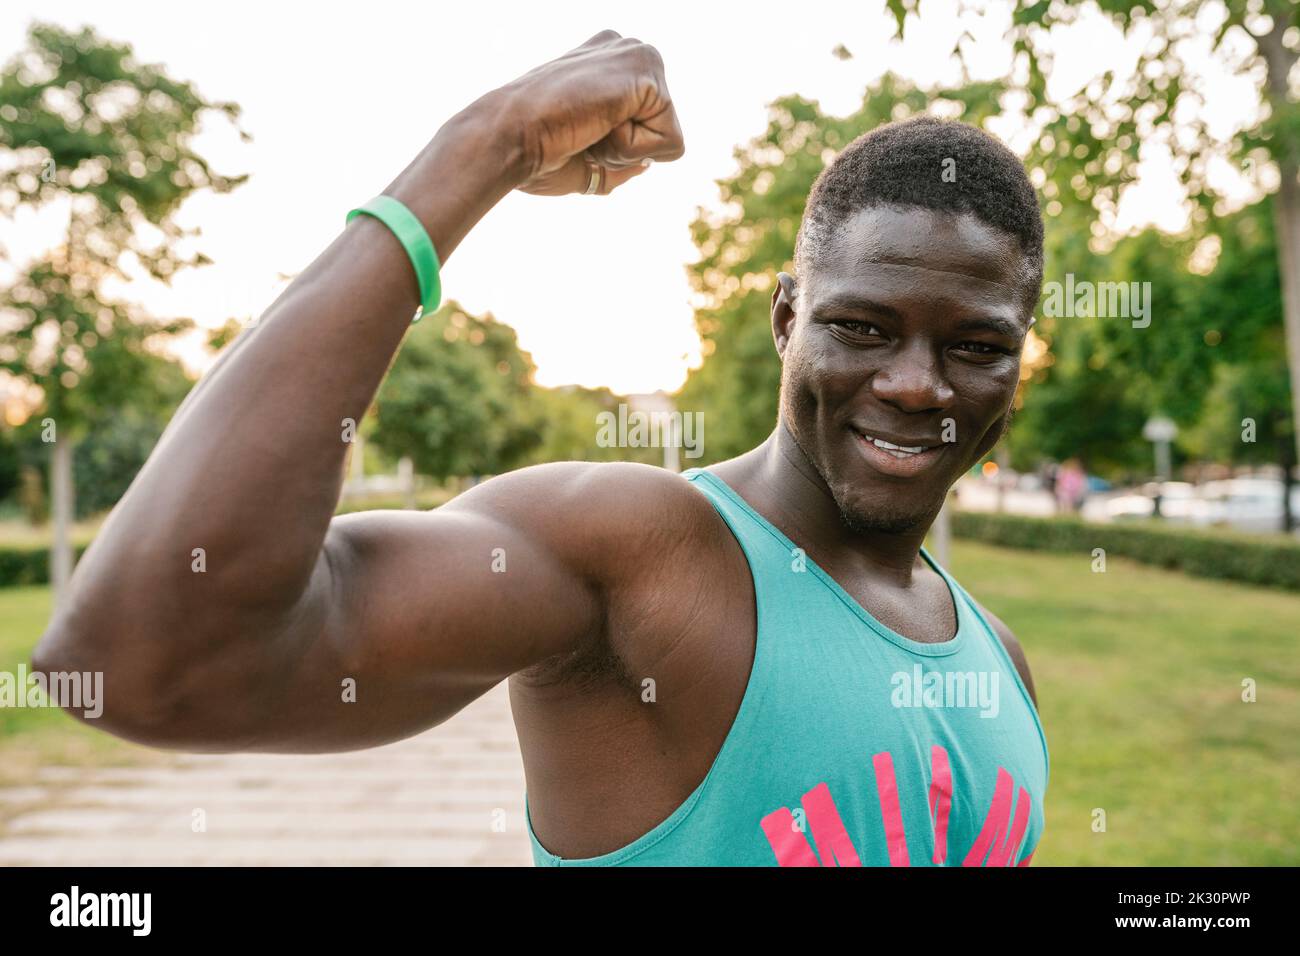 Smiling young man flexing muscles at park Stock Photo